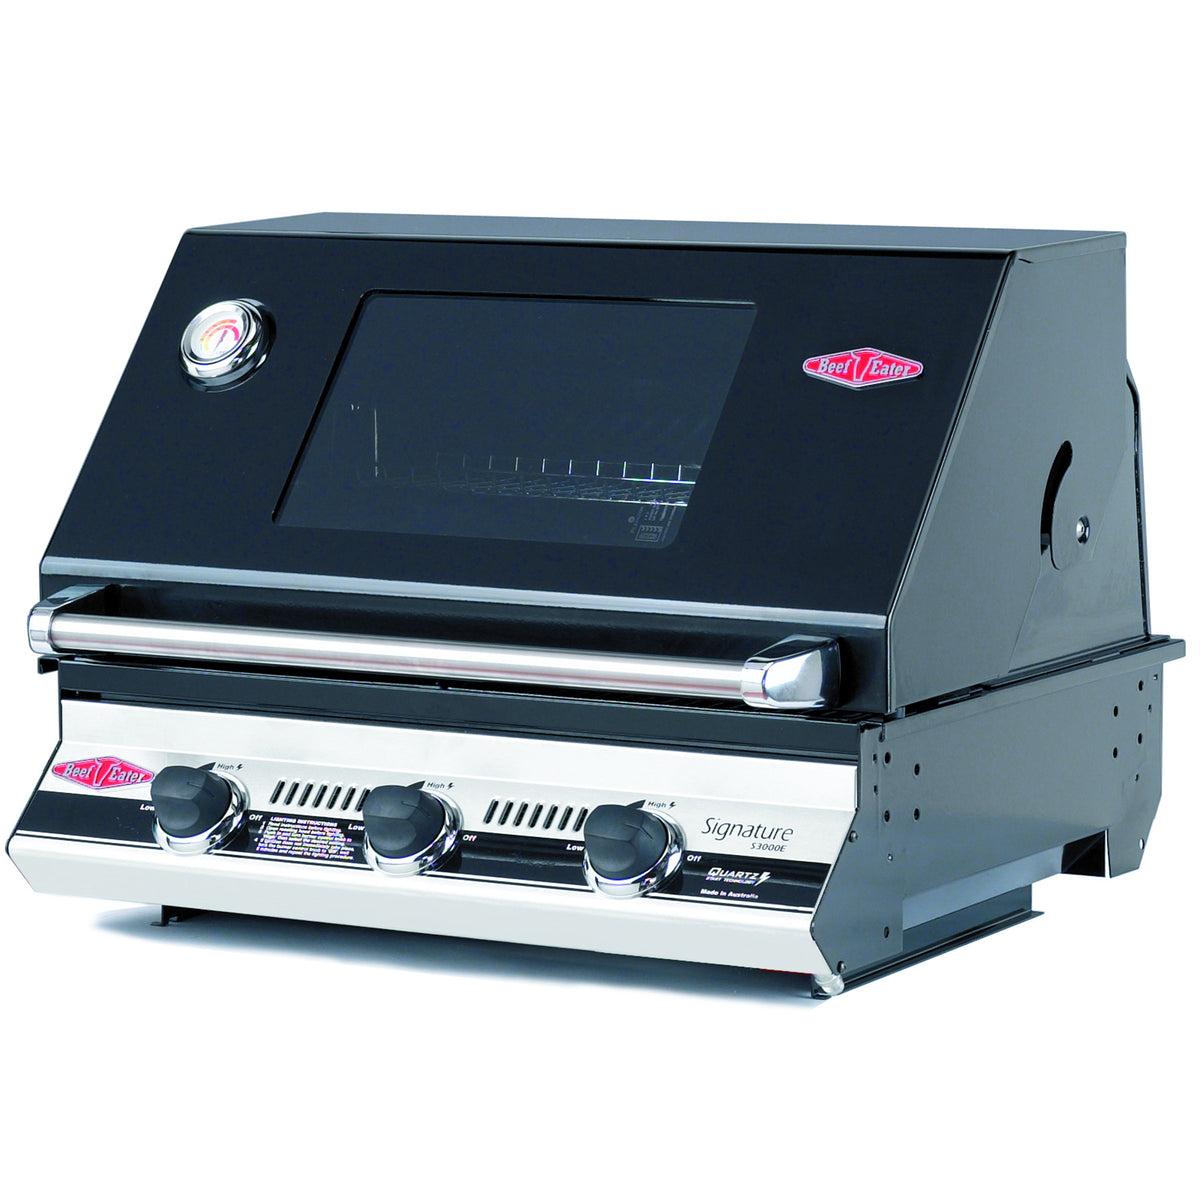 BeefEater Signature S3000E Series 3 Burner Build-in Gas Barbecue